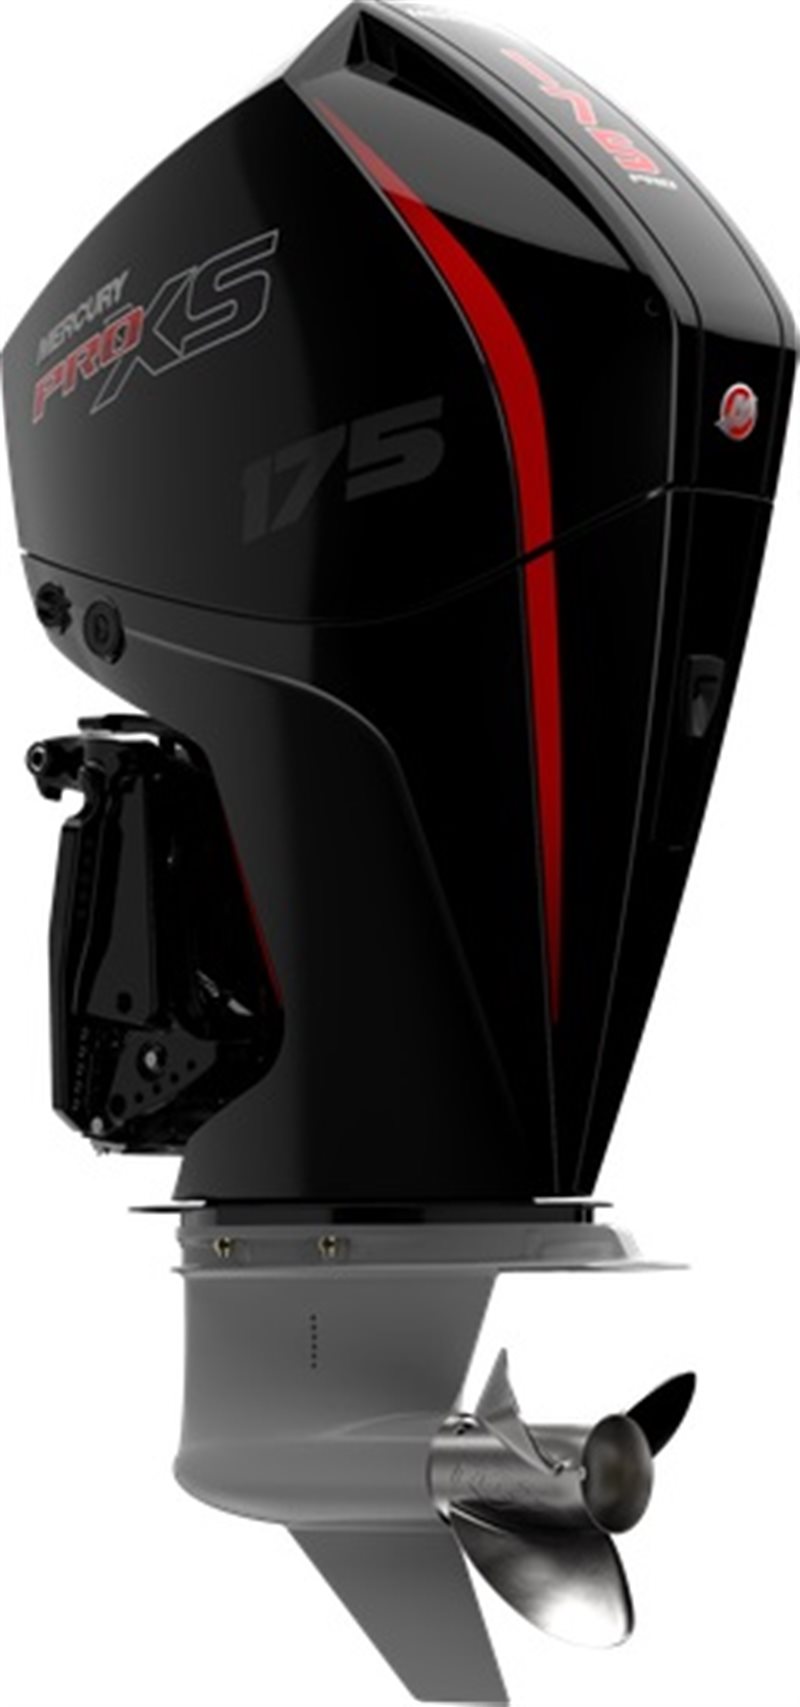 2020 Mercury Outboard Pro XS 175 - 300 at Fort Fremont Marine